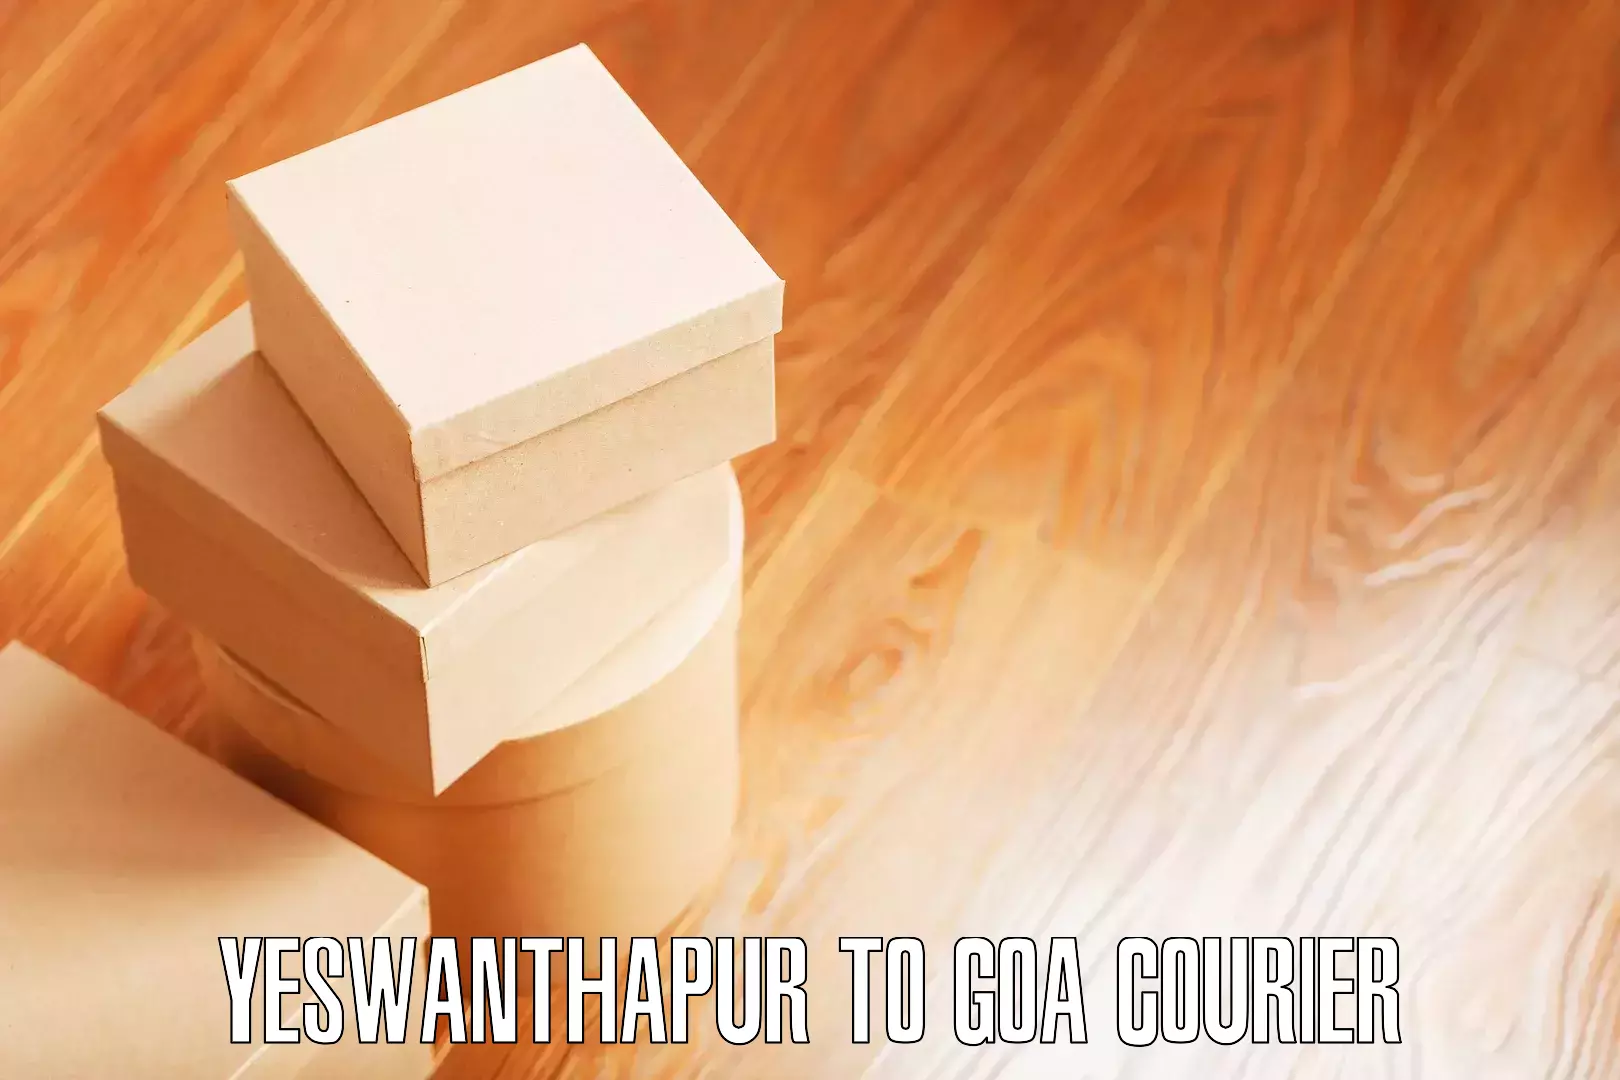 Furniture transport service Yeswanthapur to Goa